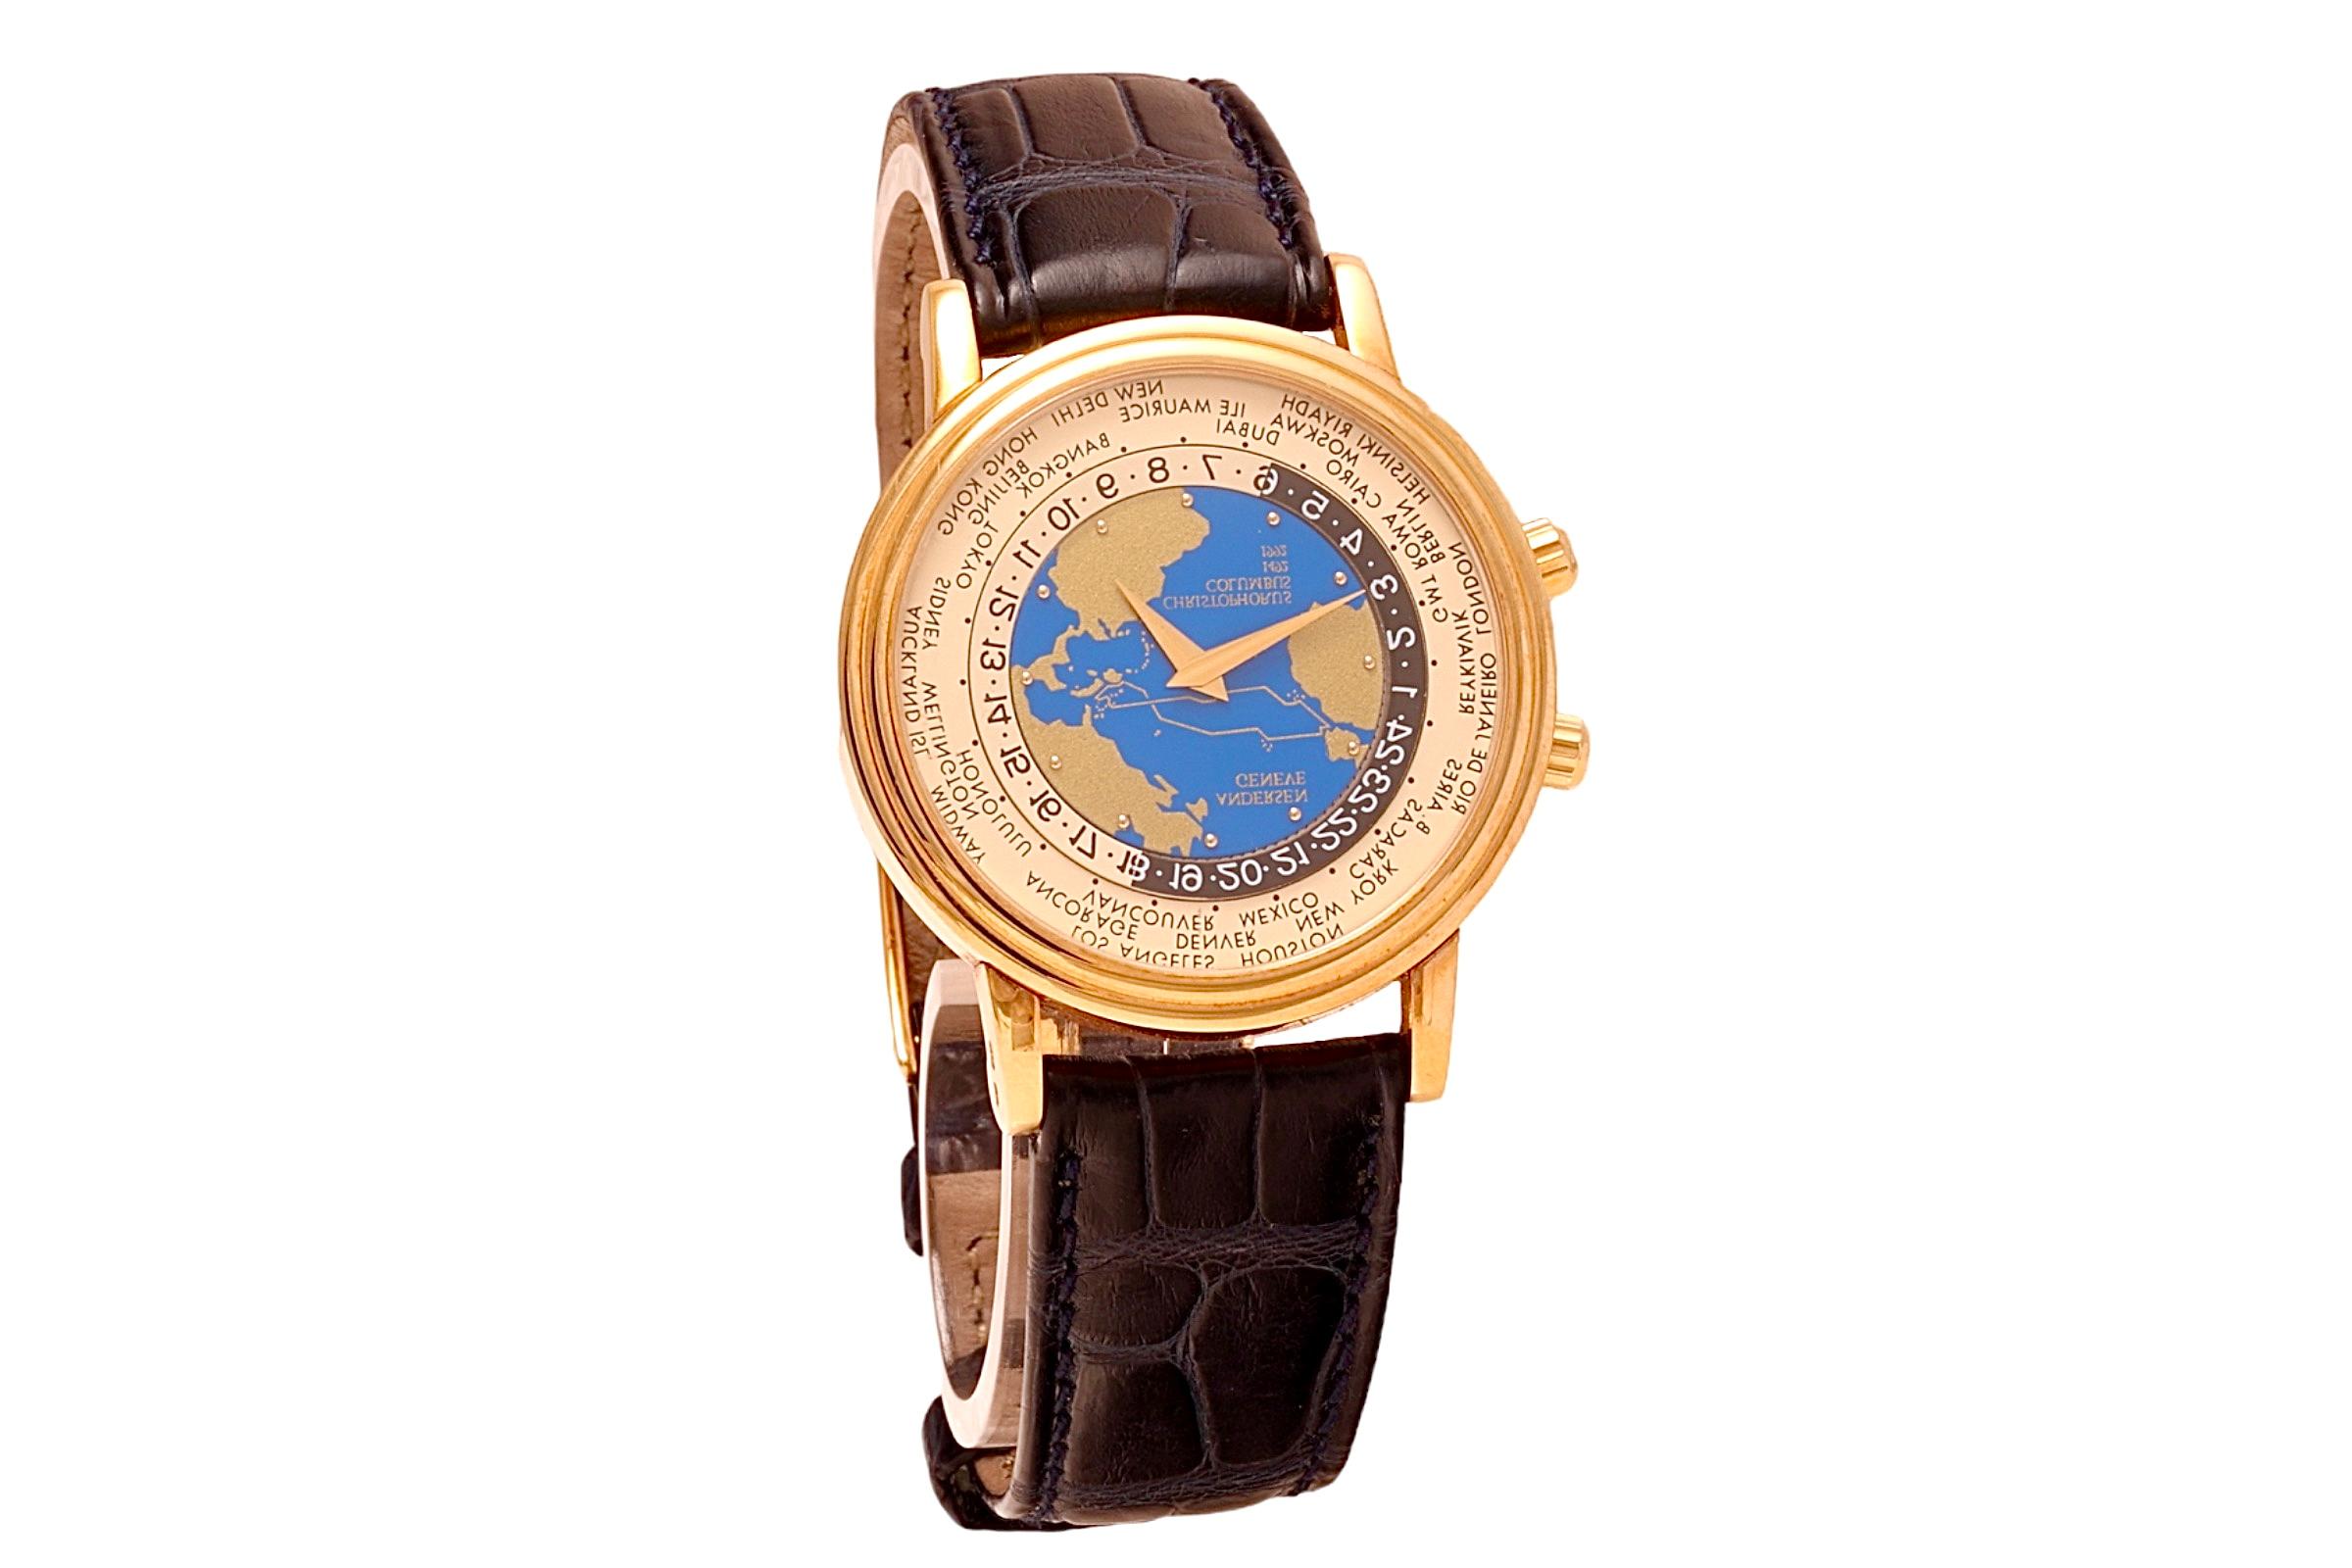 EXTREMELY RARE AND COLLECTIBLE LIMITED EDITION SVEND ANDERSEN WORLDTIMER  BRAND NEW WITH ORIGINAL BOX AND ALL WARRANTY PAPERS !!!!

LIMITED to 500 PIECES of which ONLY 300 in yellow gold !!!

1492-1992: for the 500th ANNIVERSARY  of the